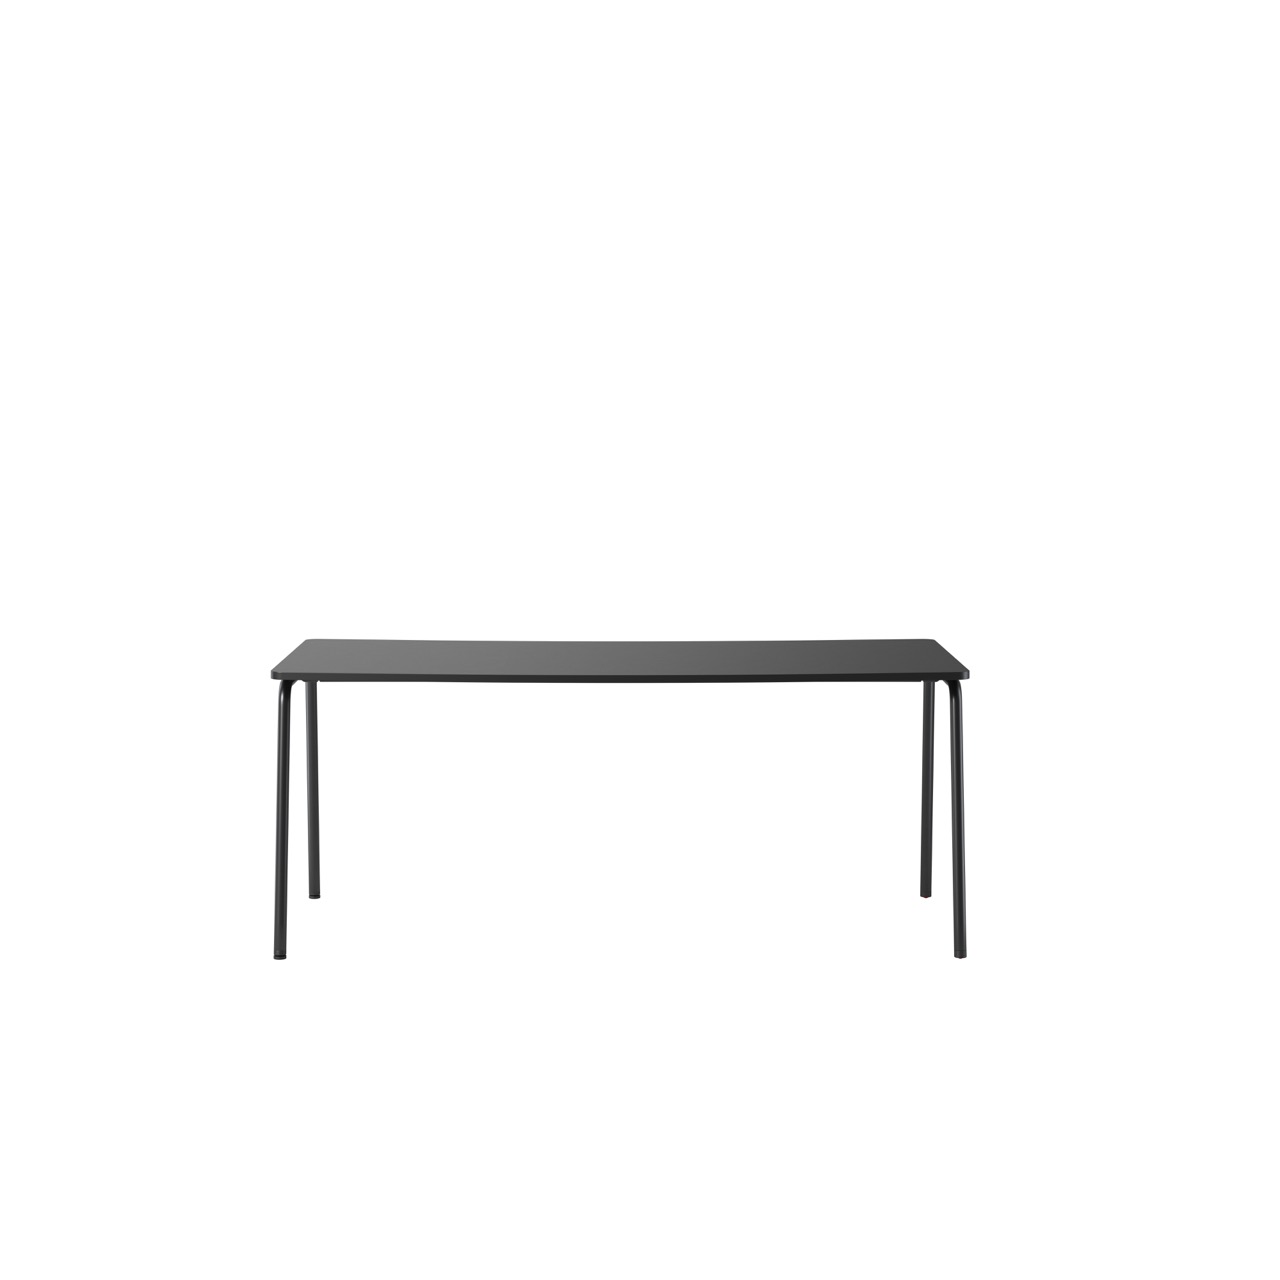 OCEE&FOUR - Tables - FourReal 74 - 180 x 80 - Angled - Packshot Image 4 Large